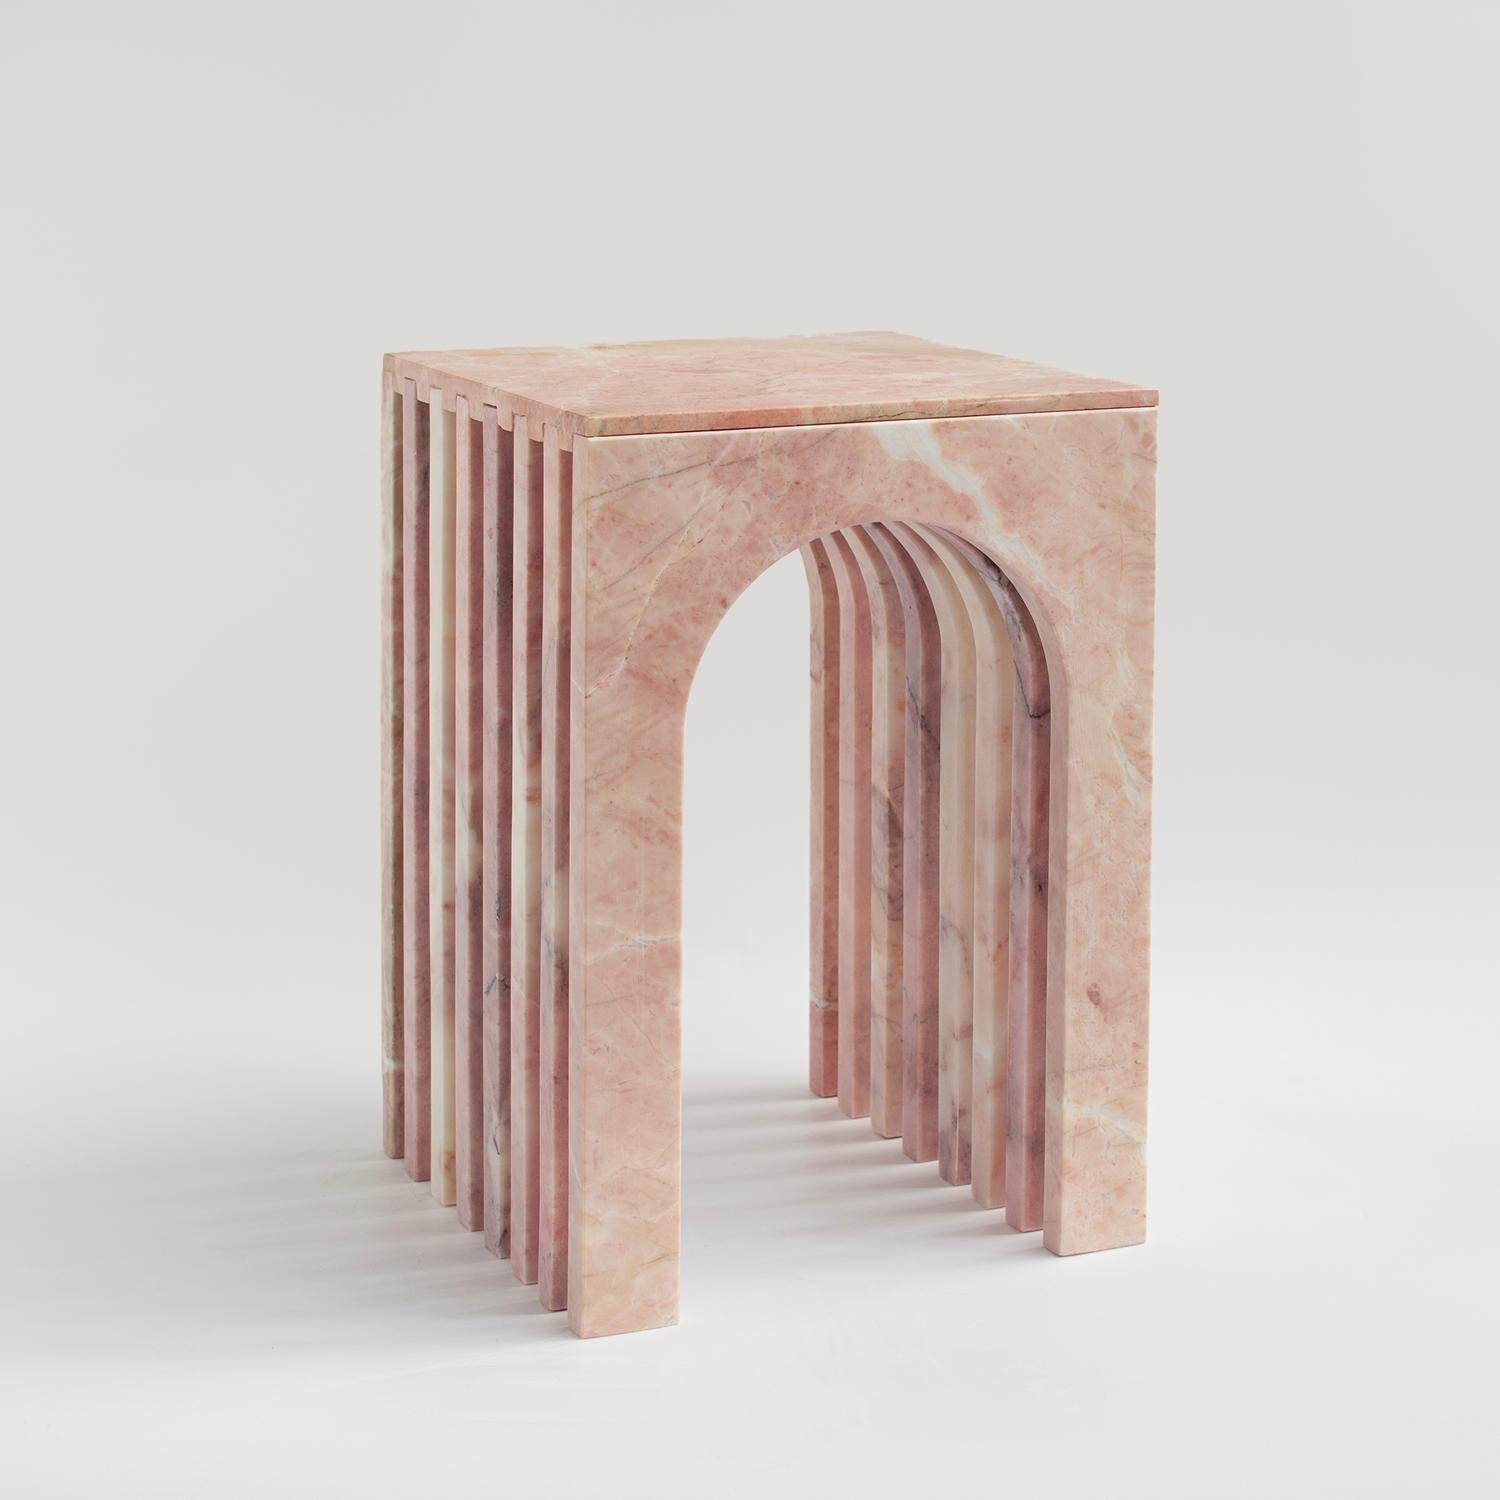 With a hint of feminine flair, this Pink Marble Side Table brings a subtle pop of color and charm to any room.
Crafted from gorgeous natural marble in a blushing pink hue, the arch-shaped silhouette consists of gracefully layered slabs that cascade